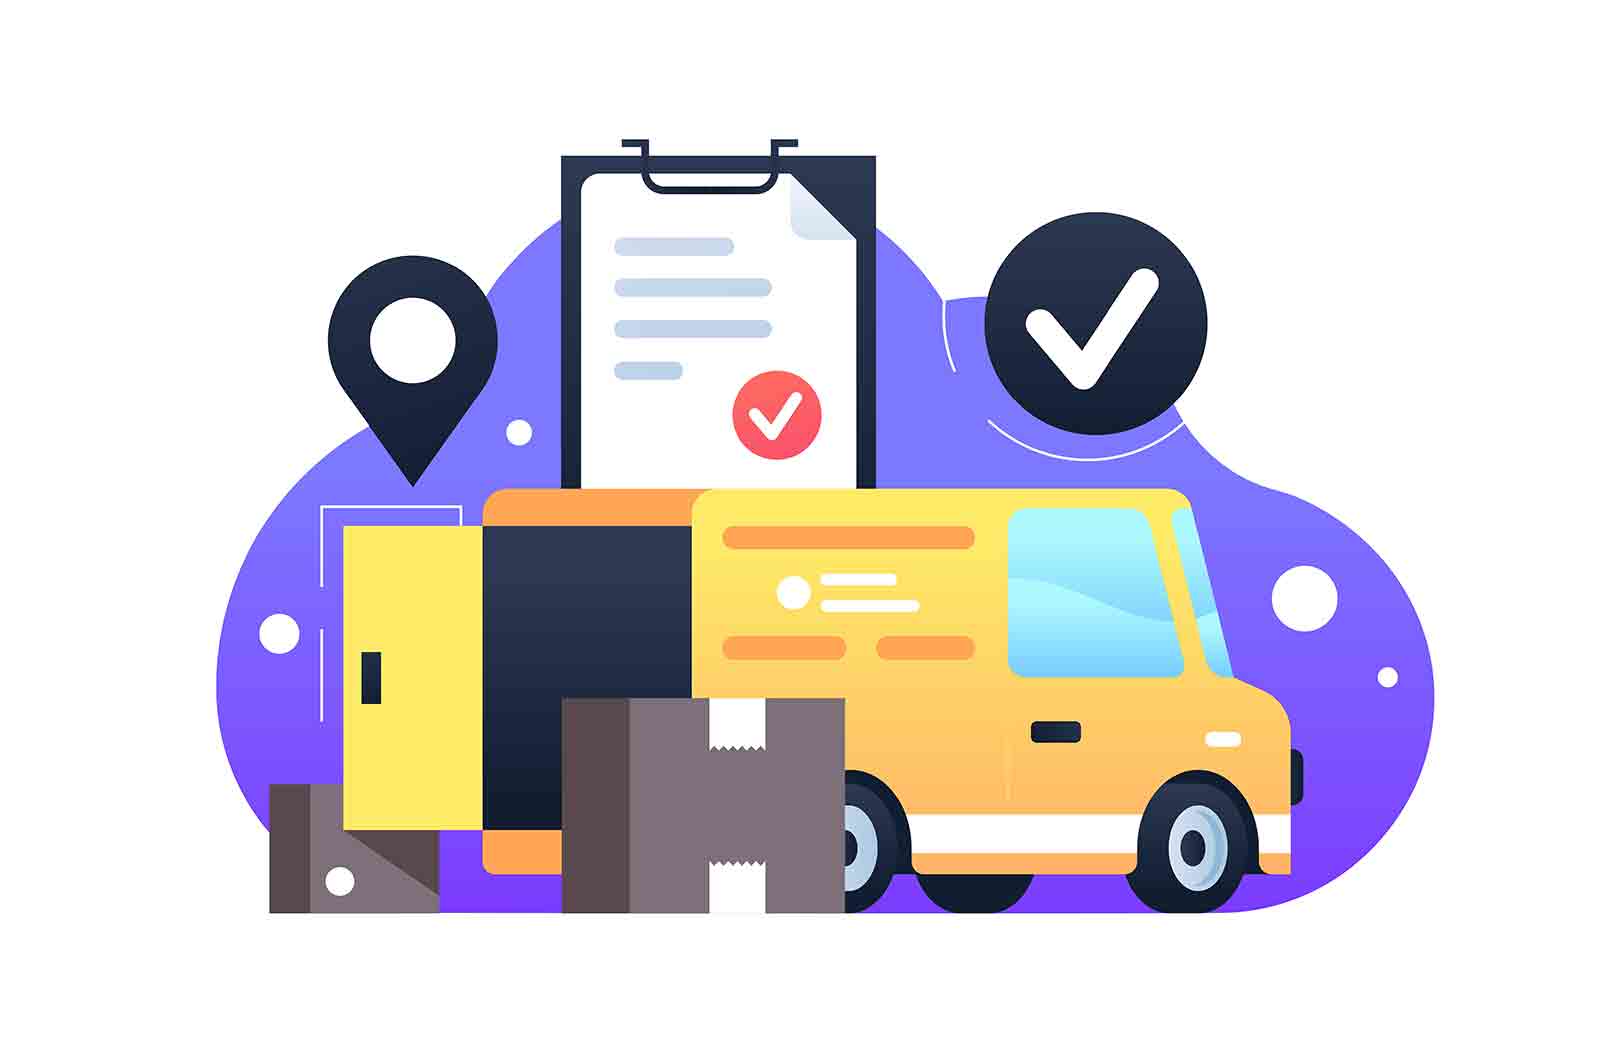 Car delivery with moving boxes and document tablet. Concept urban vehicle service, truck shipment using digital map pointing. Vector illustration.